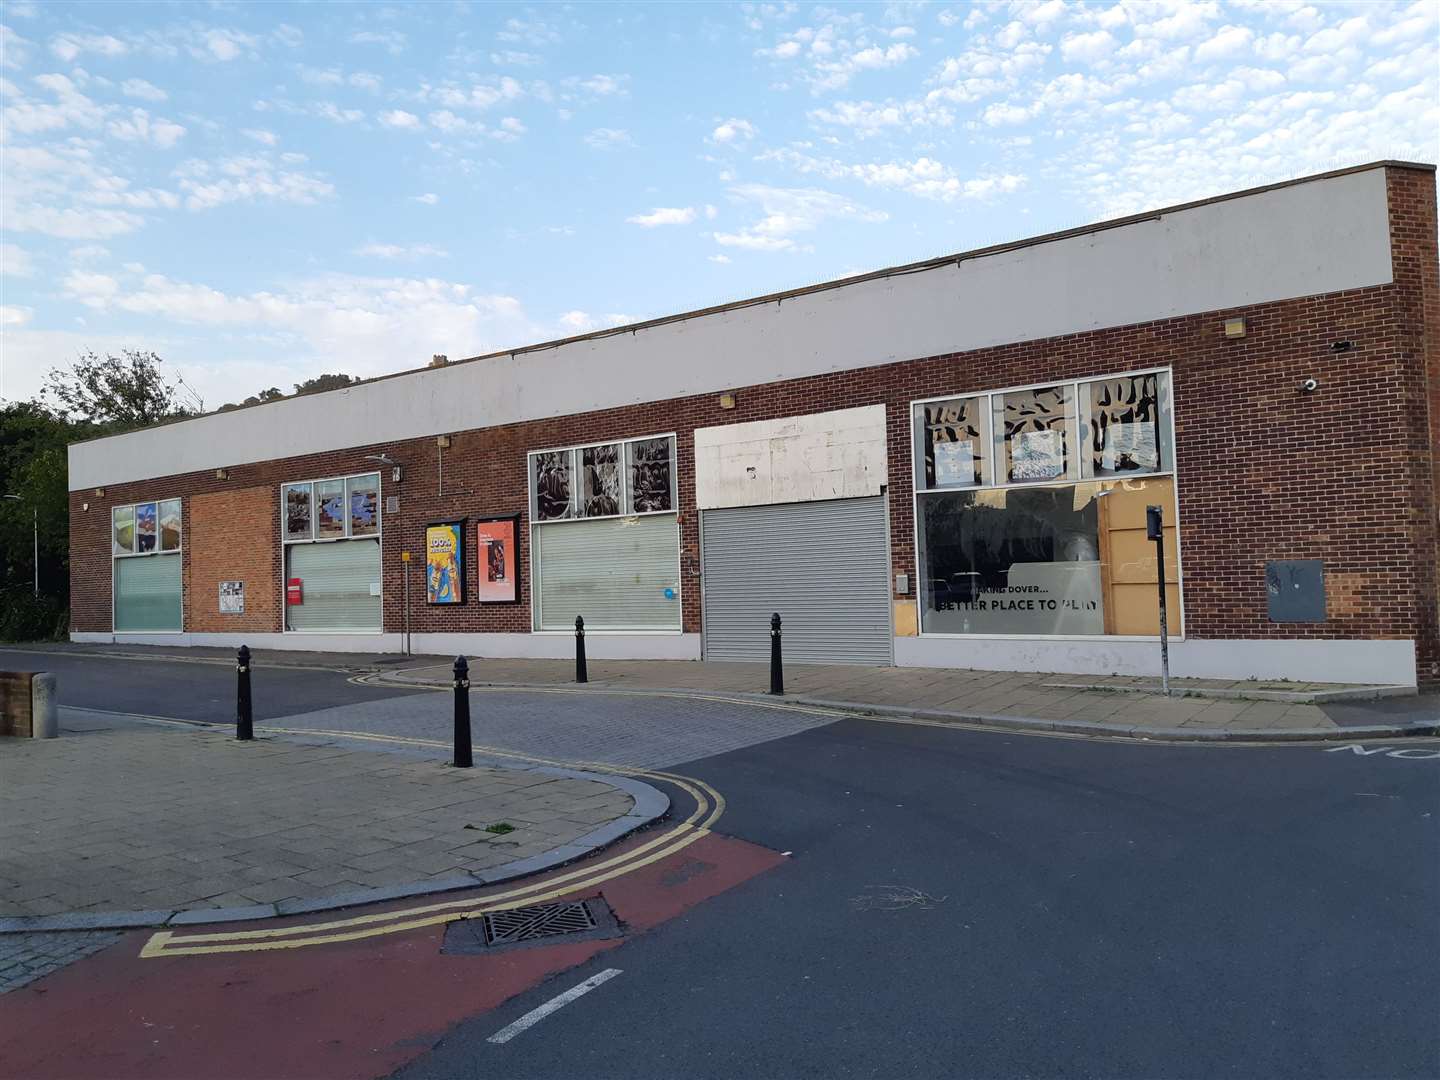 The Co-Innovation Centre in Stembrook days after its closure, August 2021. Picture: Sam Lennon